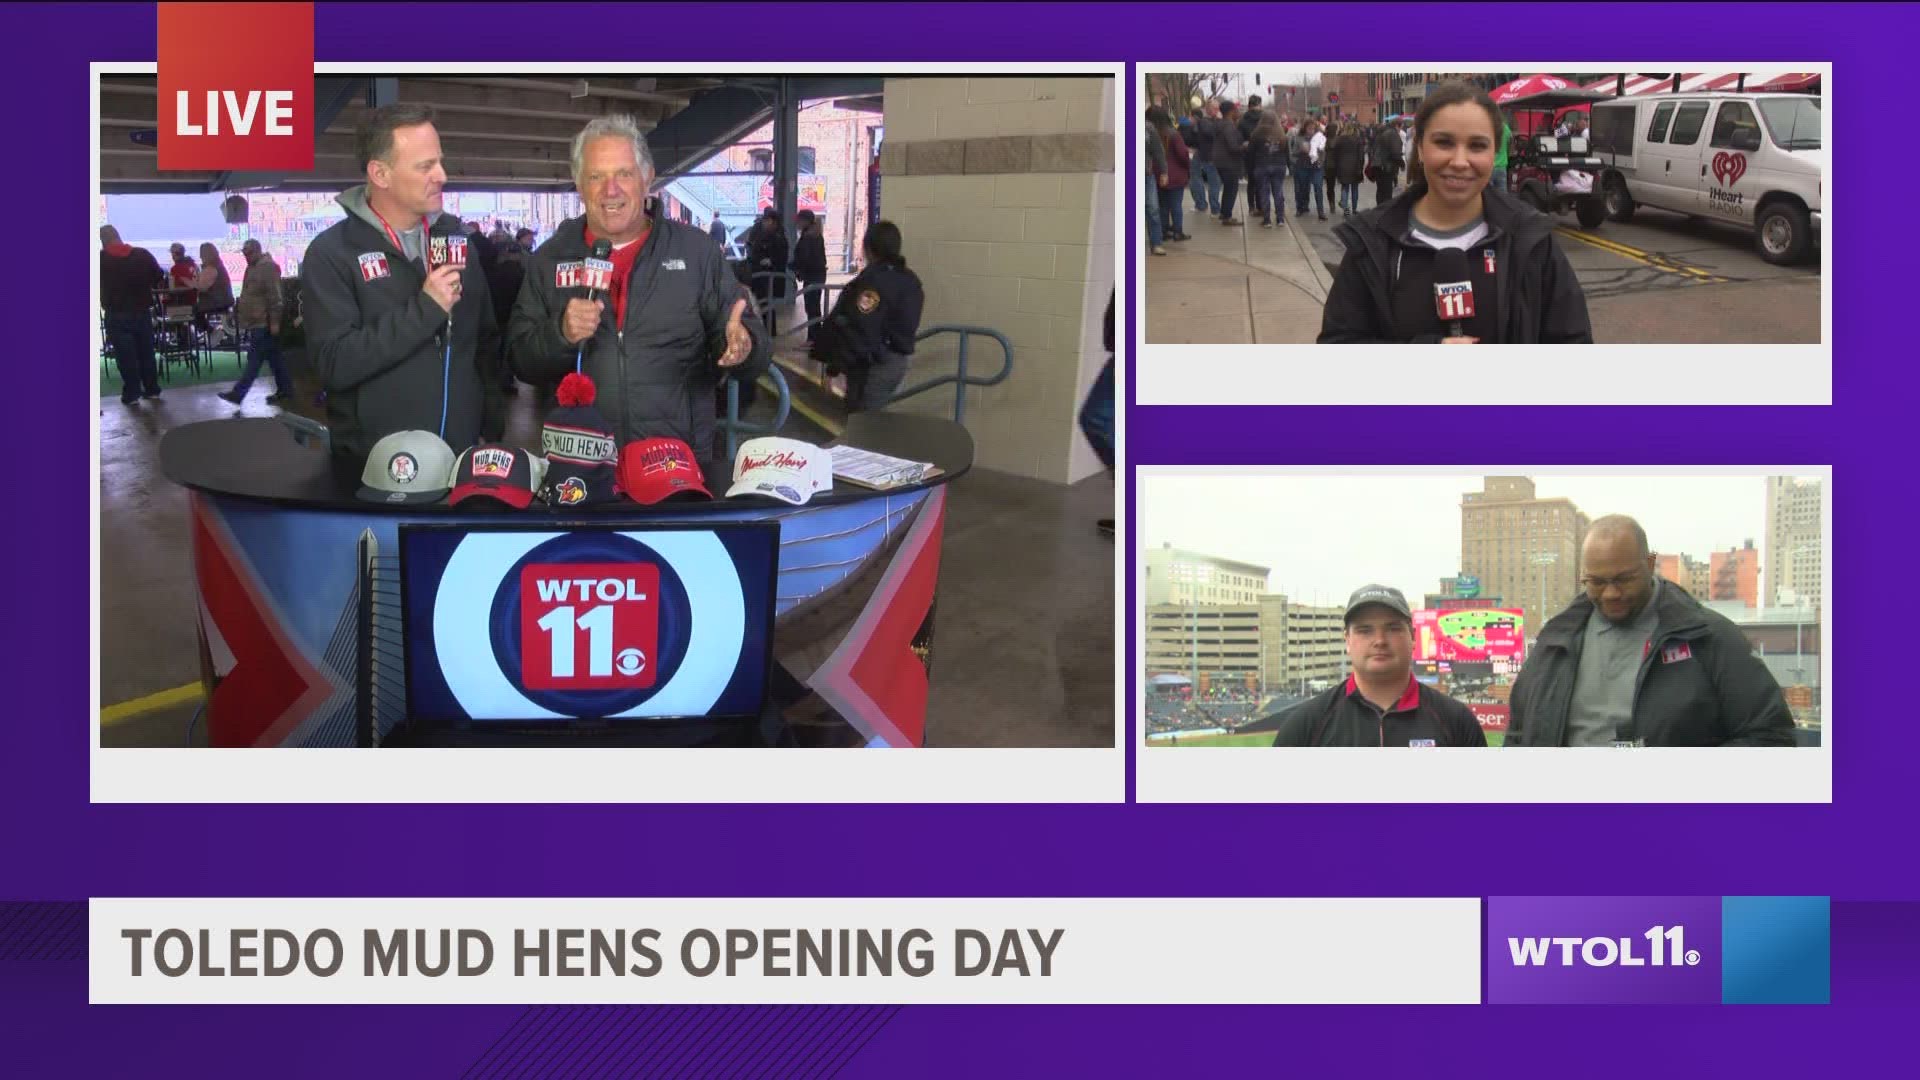 The WTOL 11 News team celebrates opening day for the Toledo Mud Hens as Fifth Third Field welcomes in new rules, new faces, new lights and more.